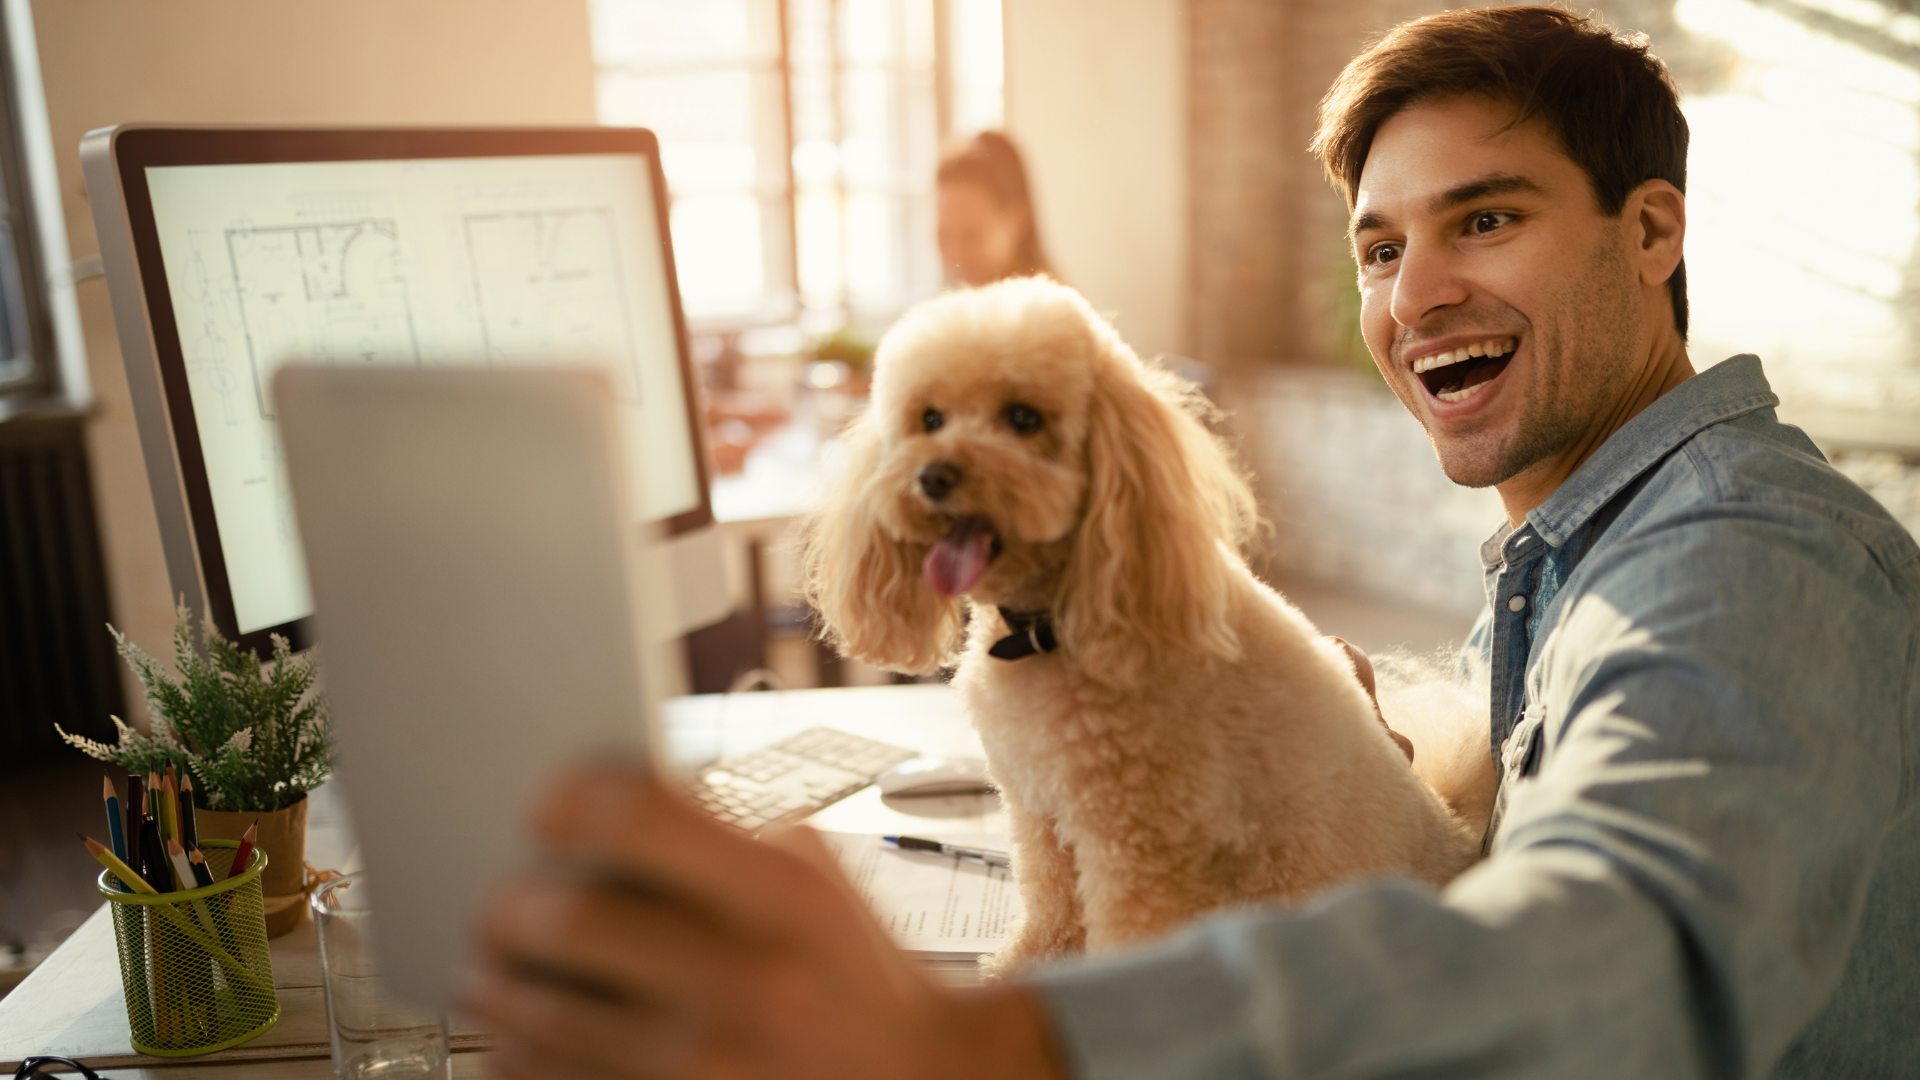 How to Keep Dogs Entertained While at Work